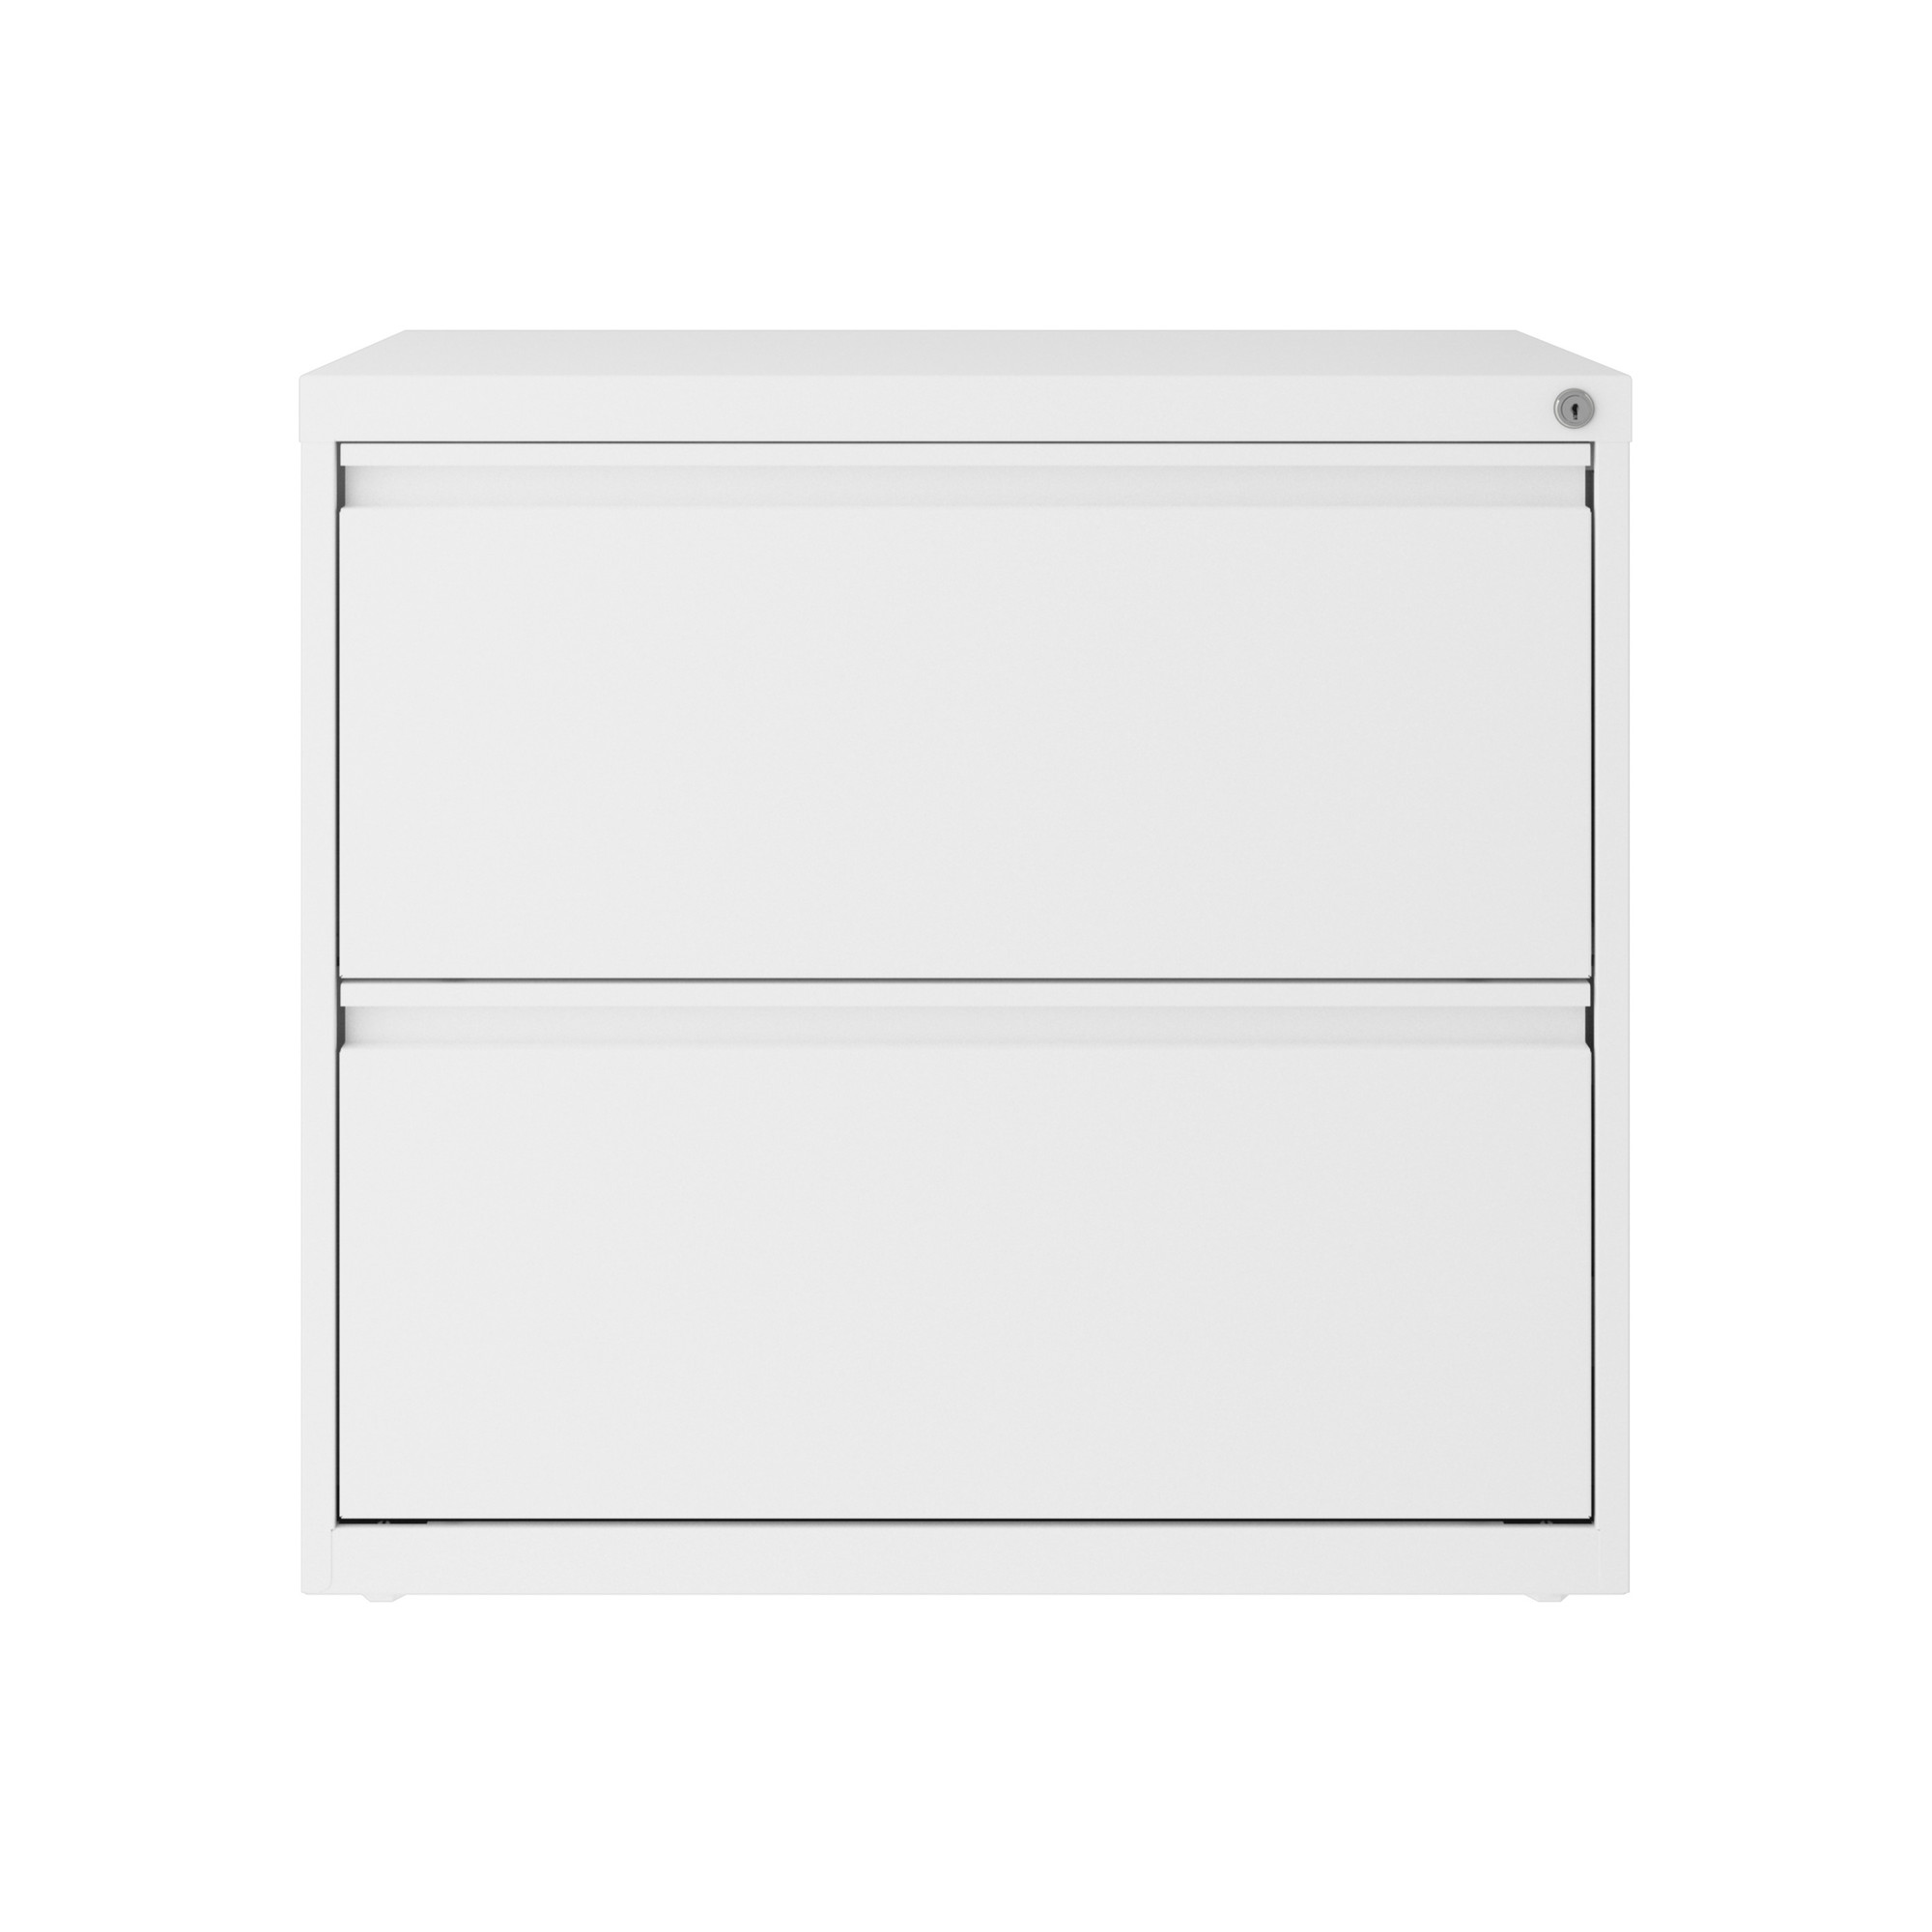 Hirsh Industries, 2 Drawer Lateral 101 File Cabinet, Width 30 in, Depth 17.63 in, Height 27.75 in, Model 24085